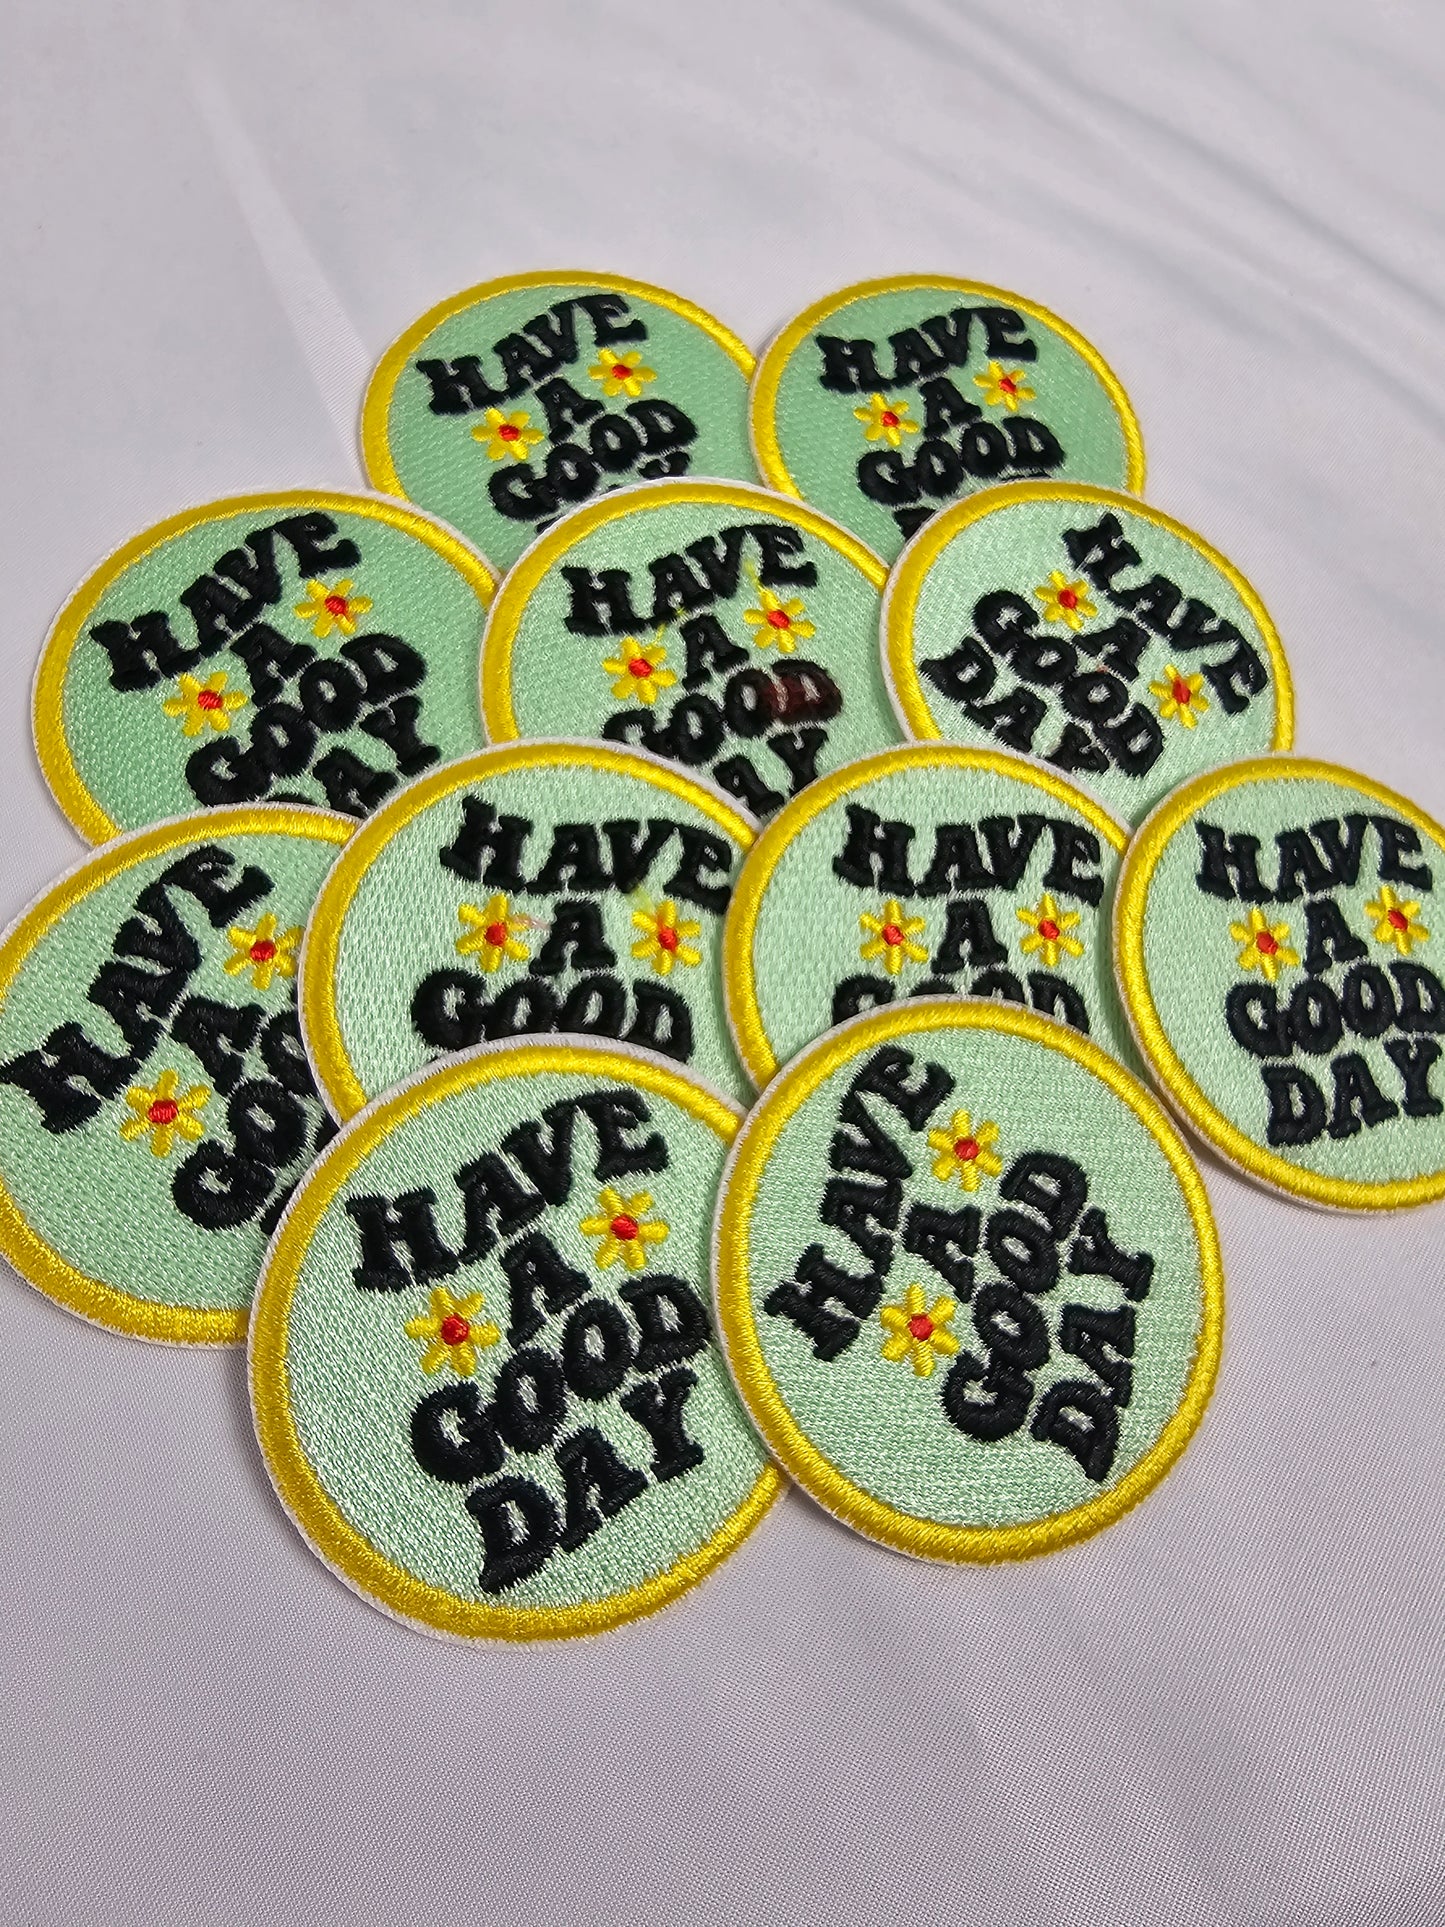 Have a Good Day Embroidery Iron On Patch